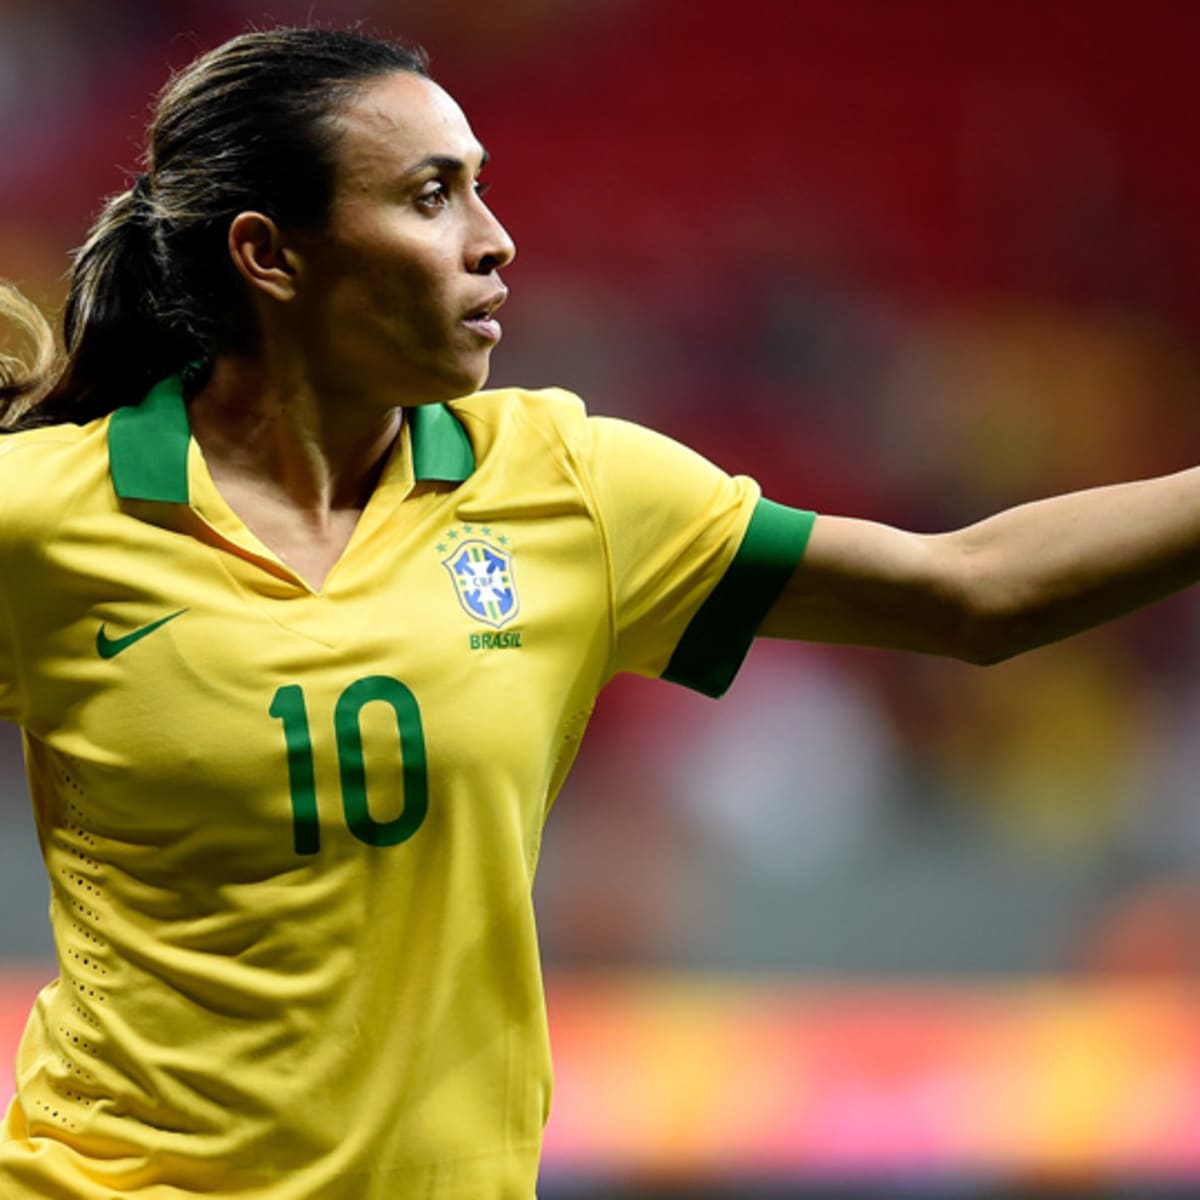 Brazil's Marta scored more World Cup goals than any woman or man